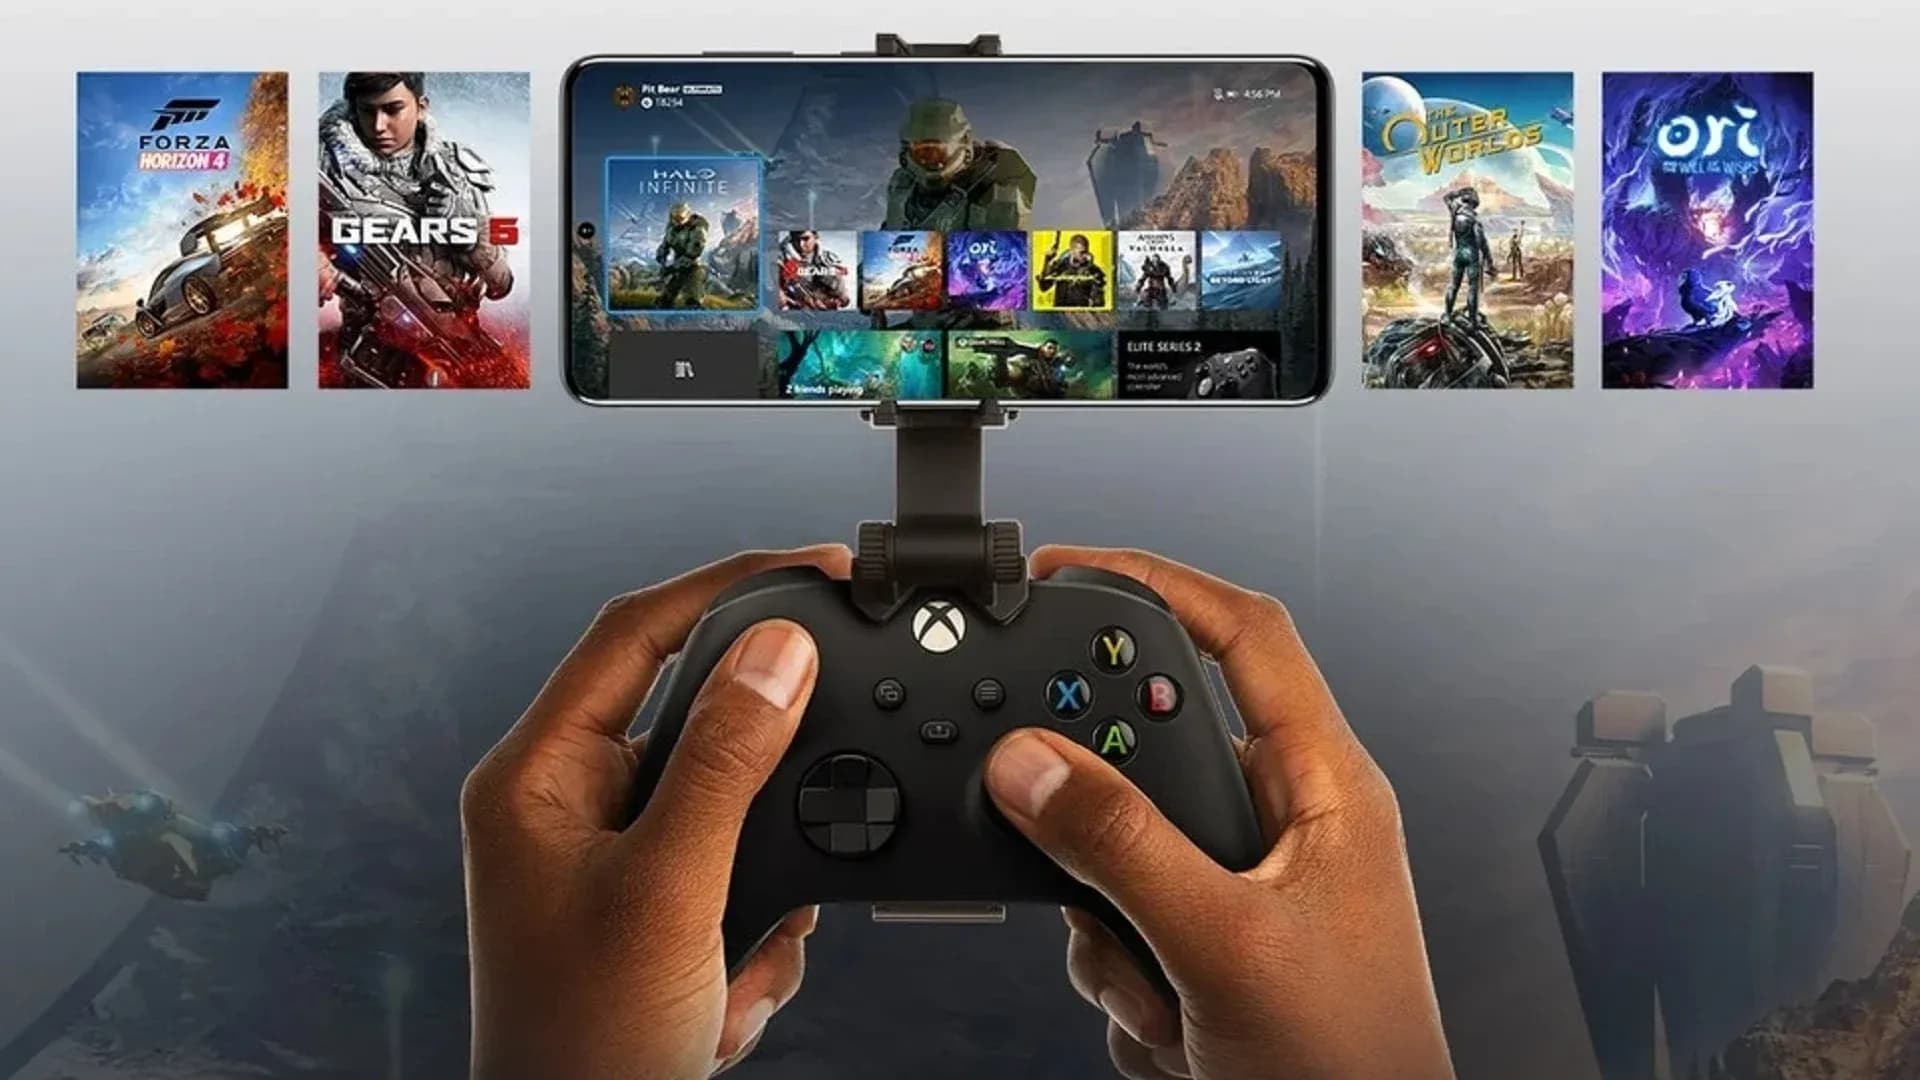 Microsoft wants to make its own game store